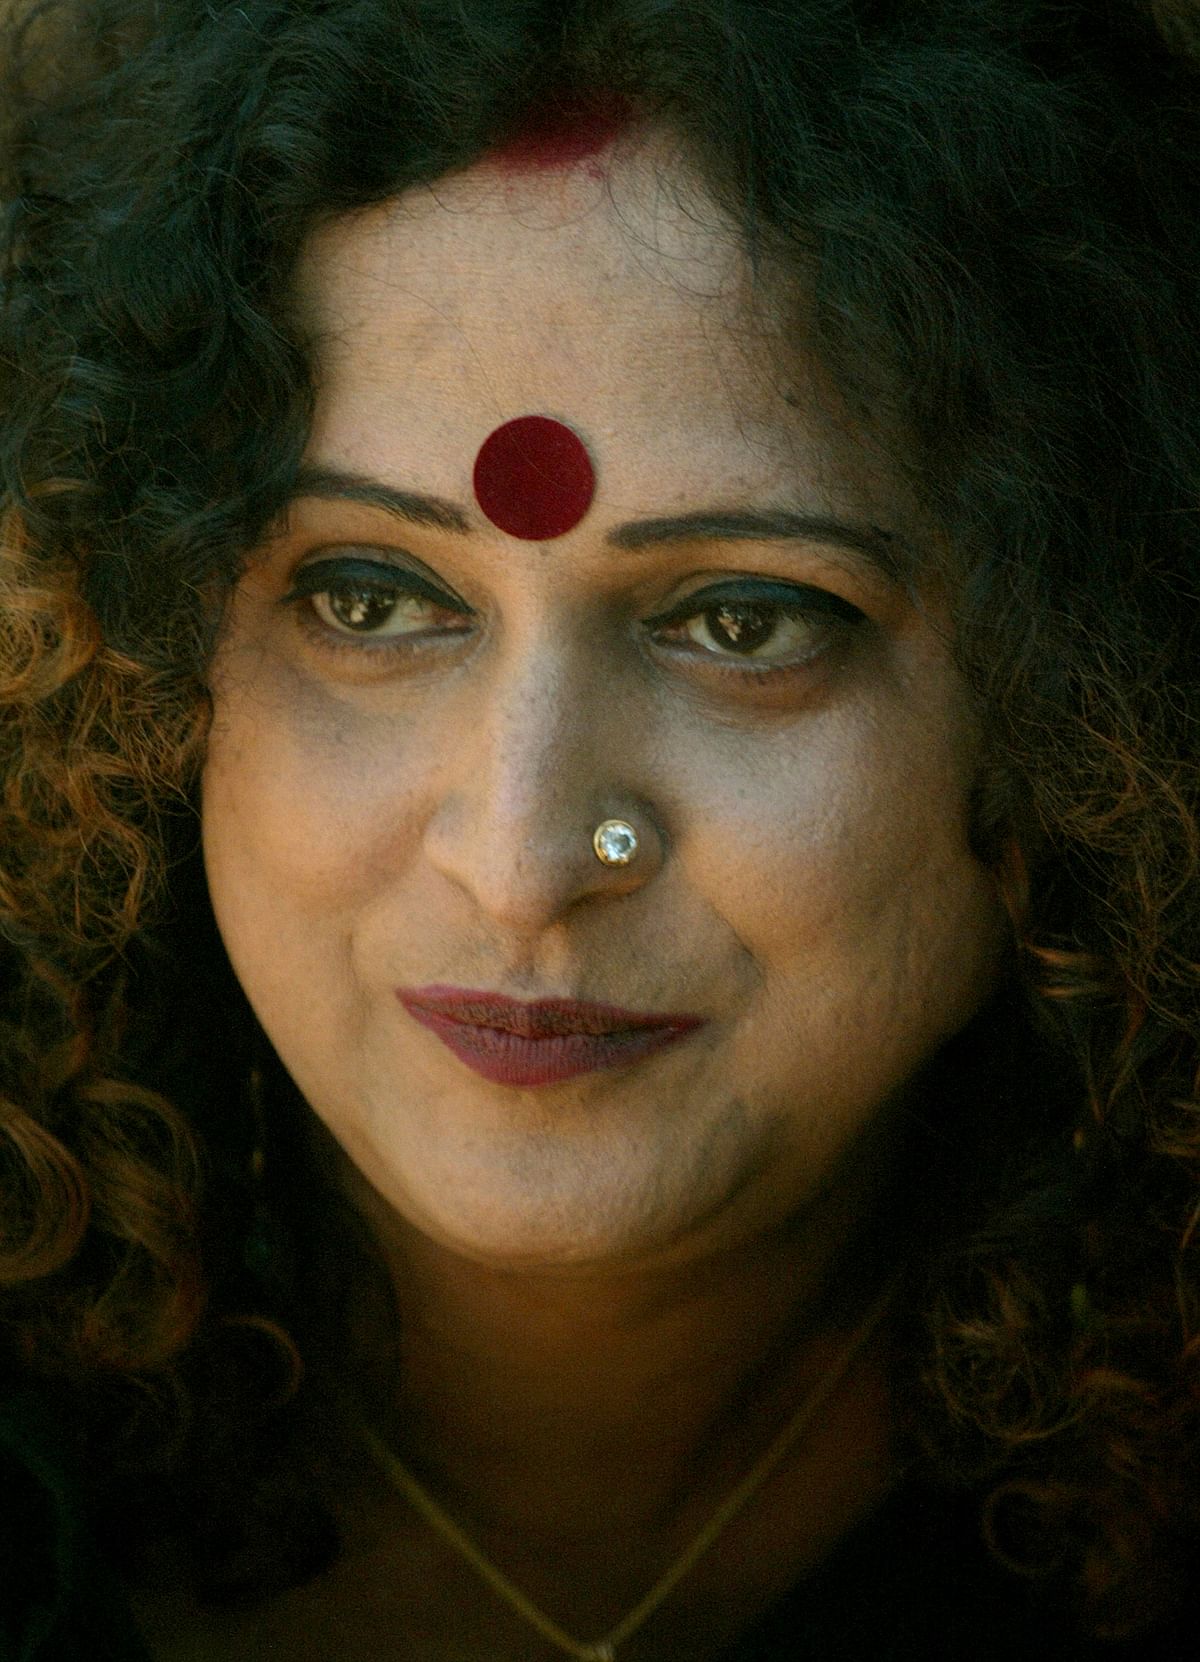 Manabi will become the first transgender Principal of a college in India, and in all probability, the world.